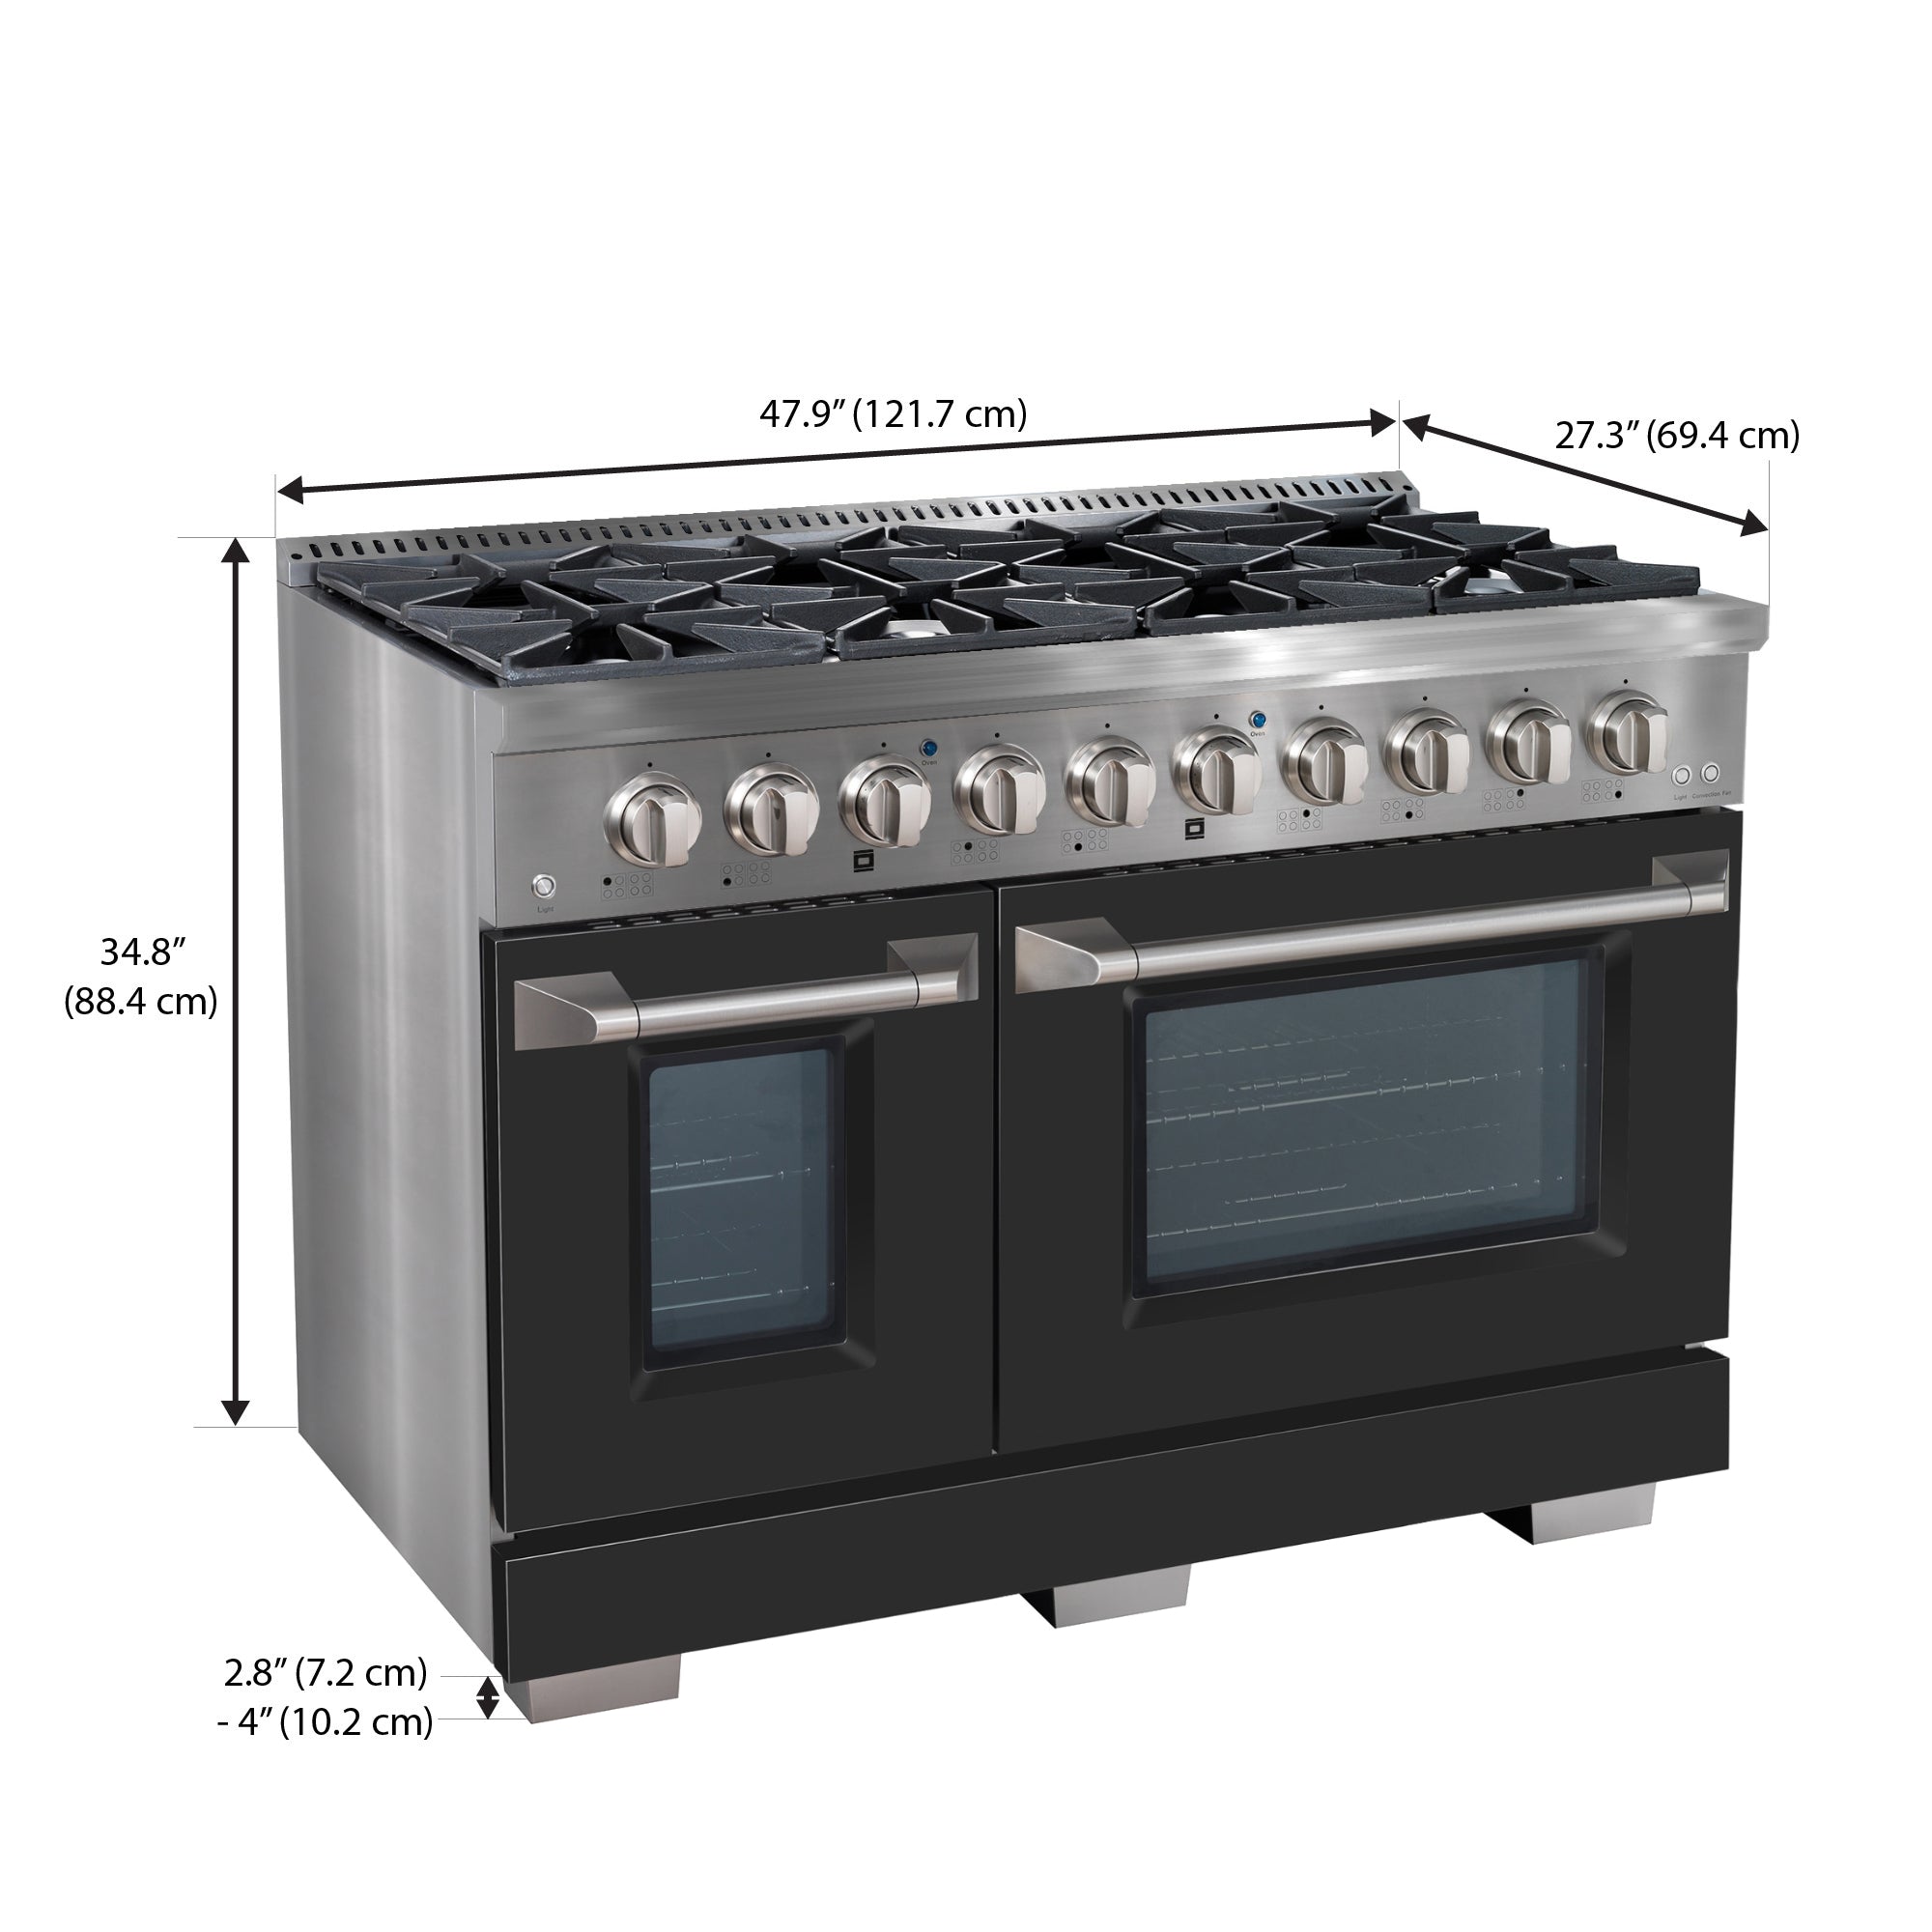 Ancona 48” 6.7 cu. Ft Double Oven Dual Fuel Range with 8 Burners, Griddle and Convection Ovens in Stainless Steel and Black